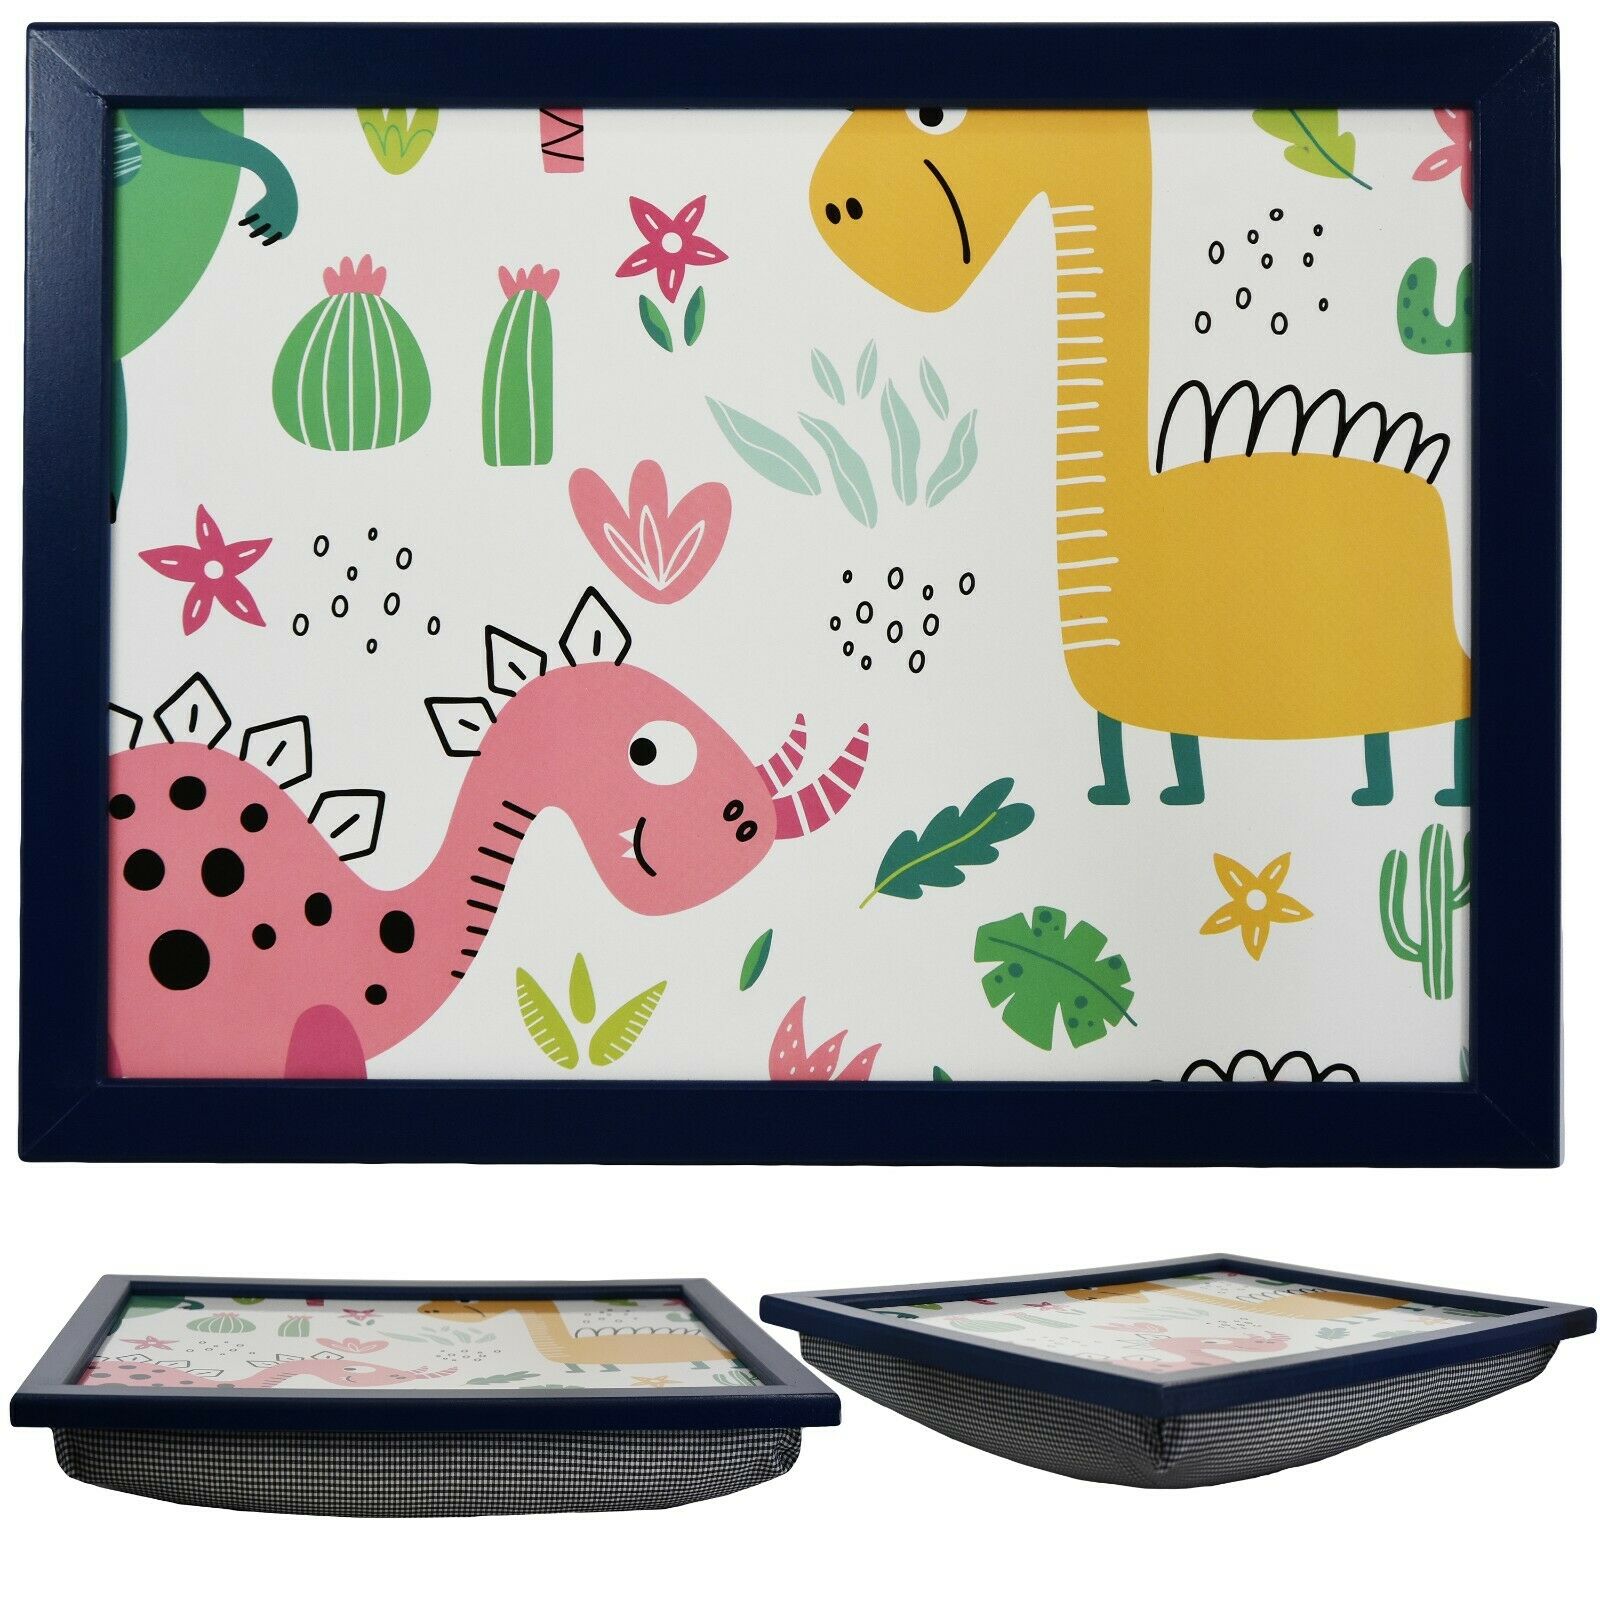 Dinosaurs Lap Tray With Bean Bag Cushion The Magic Toy Shop - The Magic Toy Shop